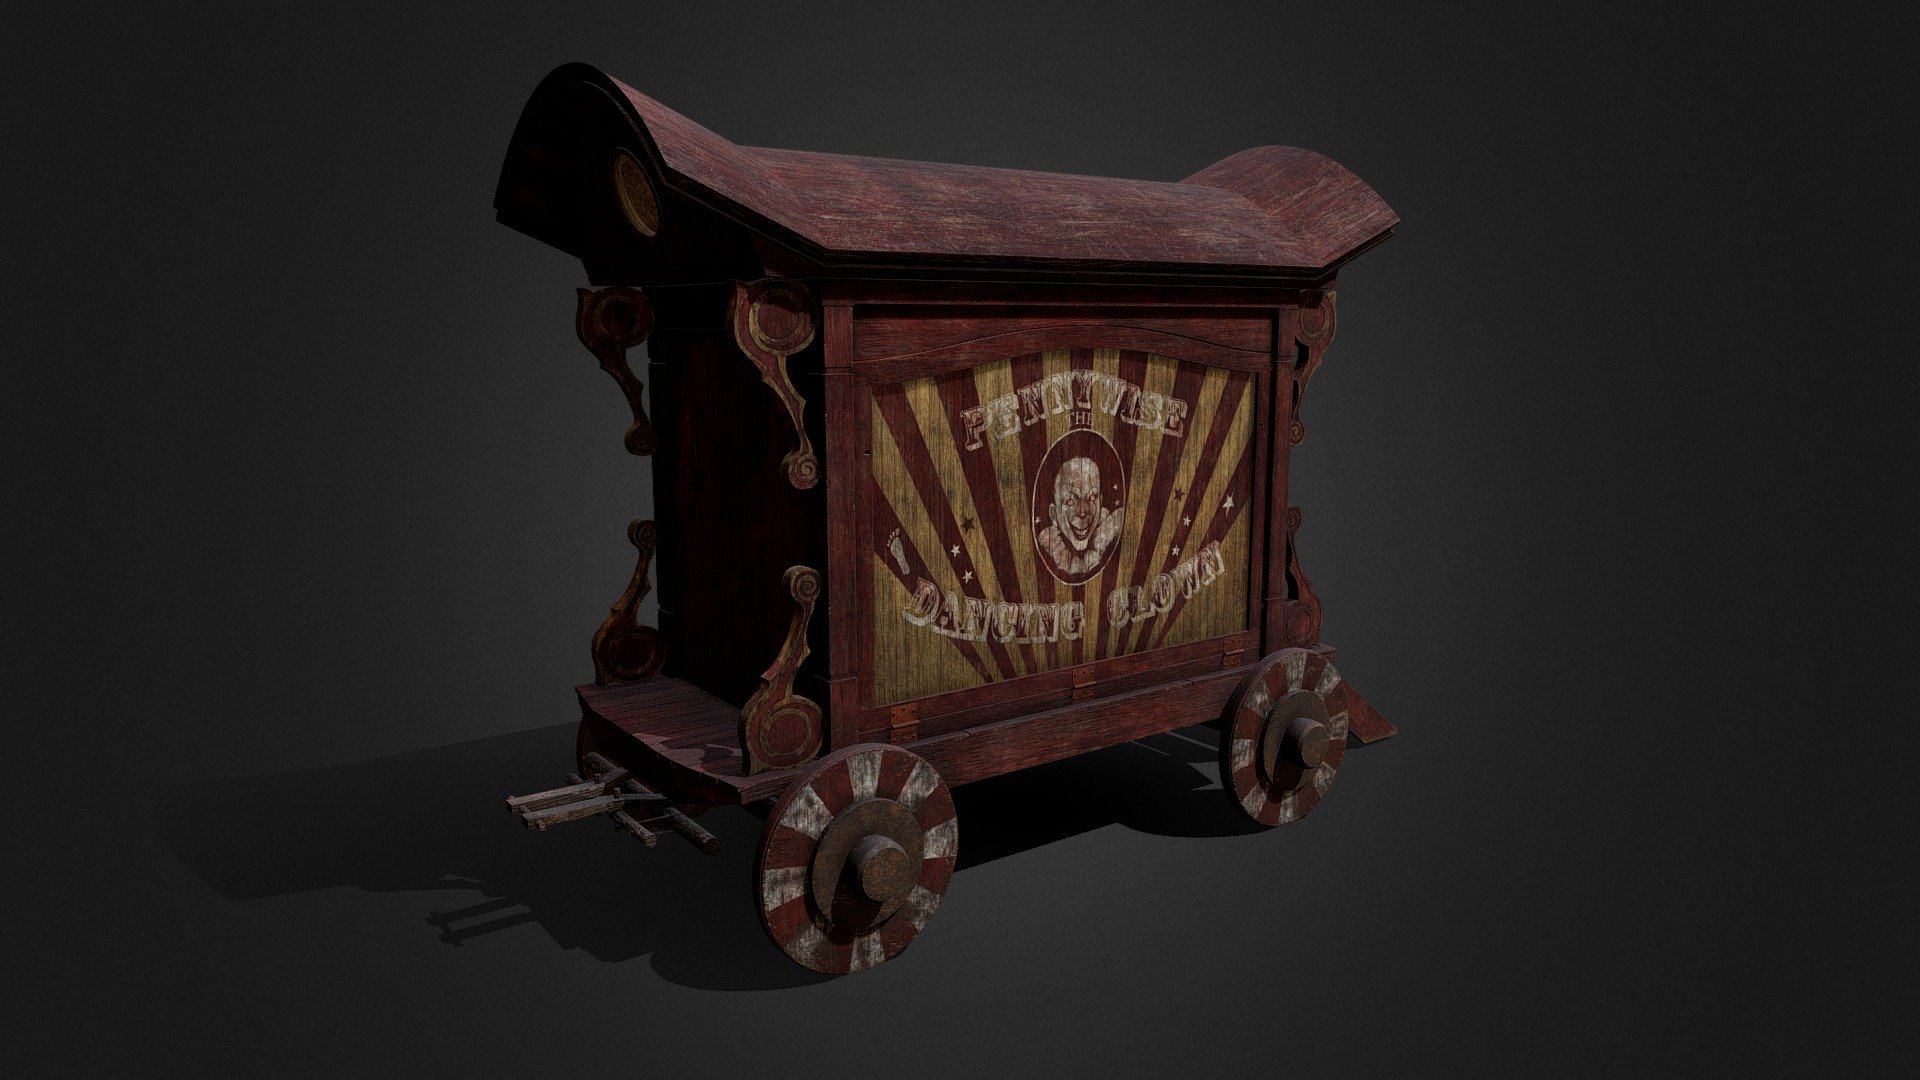 The Pennywise wagon from the new adaptation of the IT (2017) movie. I tried to make it as accurate as possible, although it’s missing some key details and textures. Hopefully I can add the curtains, ropes and tiny lantern later once I have the knowledge how to create them.
The clown portrait on the front was created by @alienrat_illustration and the landscape painting on the inside was created by @andromedadualitas, both on Instagram.


 - Pennywise's Wagon - 3D model by Meadow 3d model